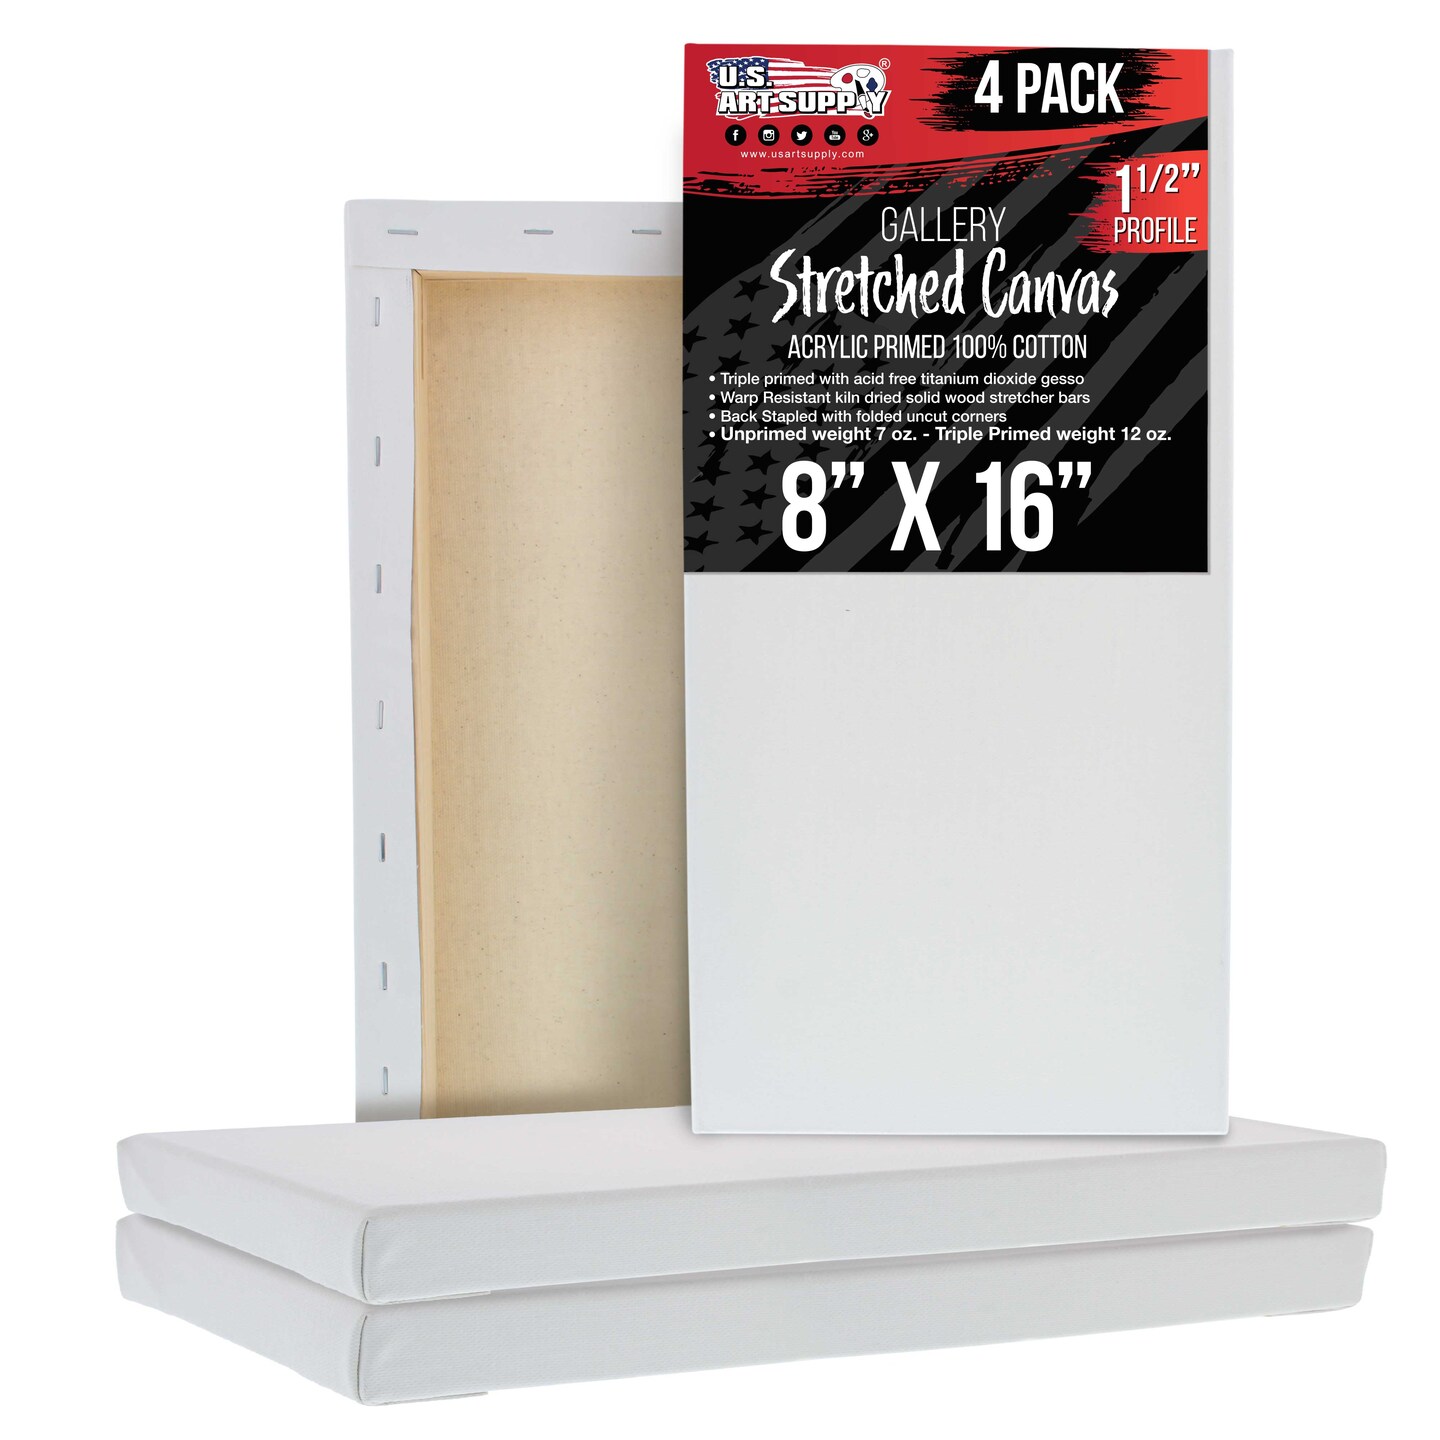 8 x 16 inch Gallery Depth 1-1/2&#x22; Profile Stretched Canvas, 4-Pack - 12-Ounce Acrylic Gesso Triple Primed, - Professional Artist Quality, 100% Cotton